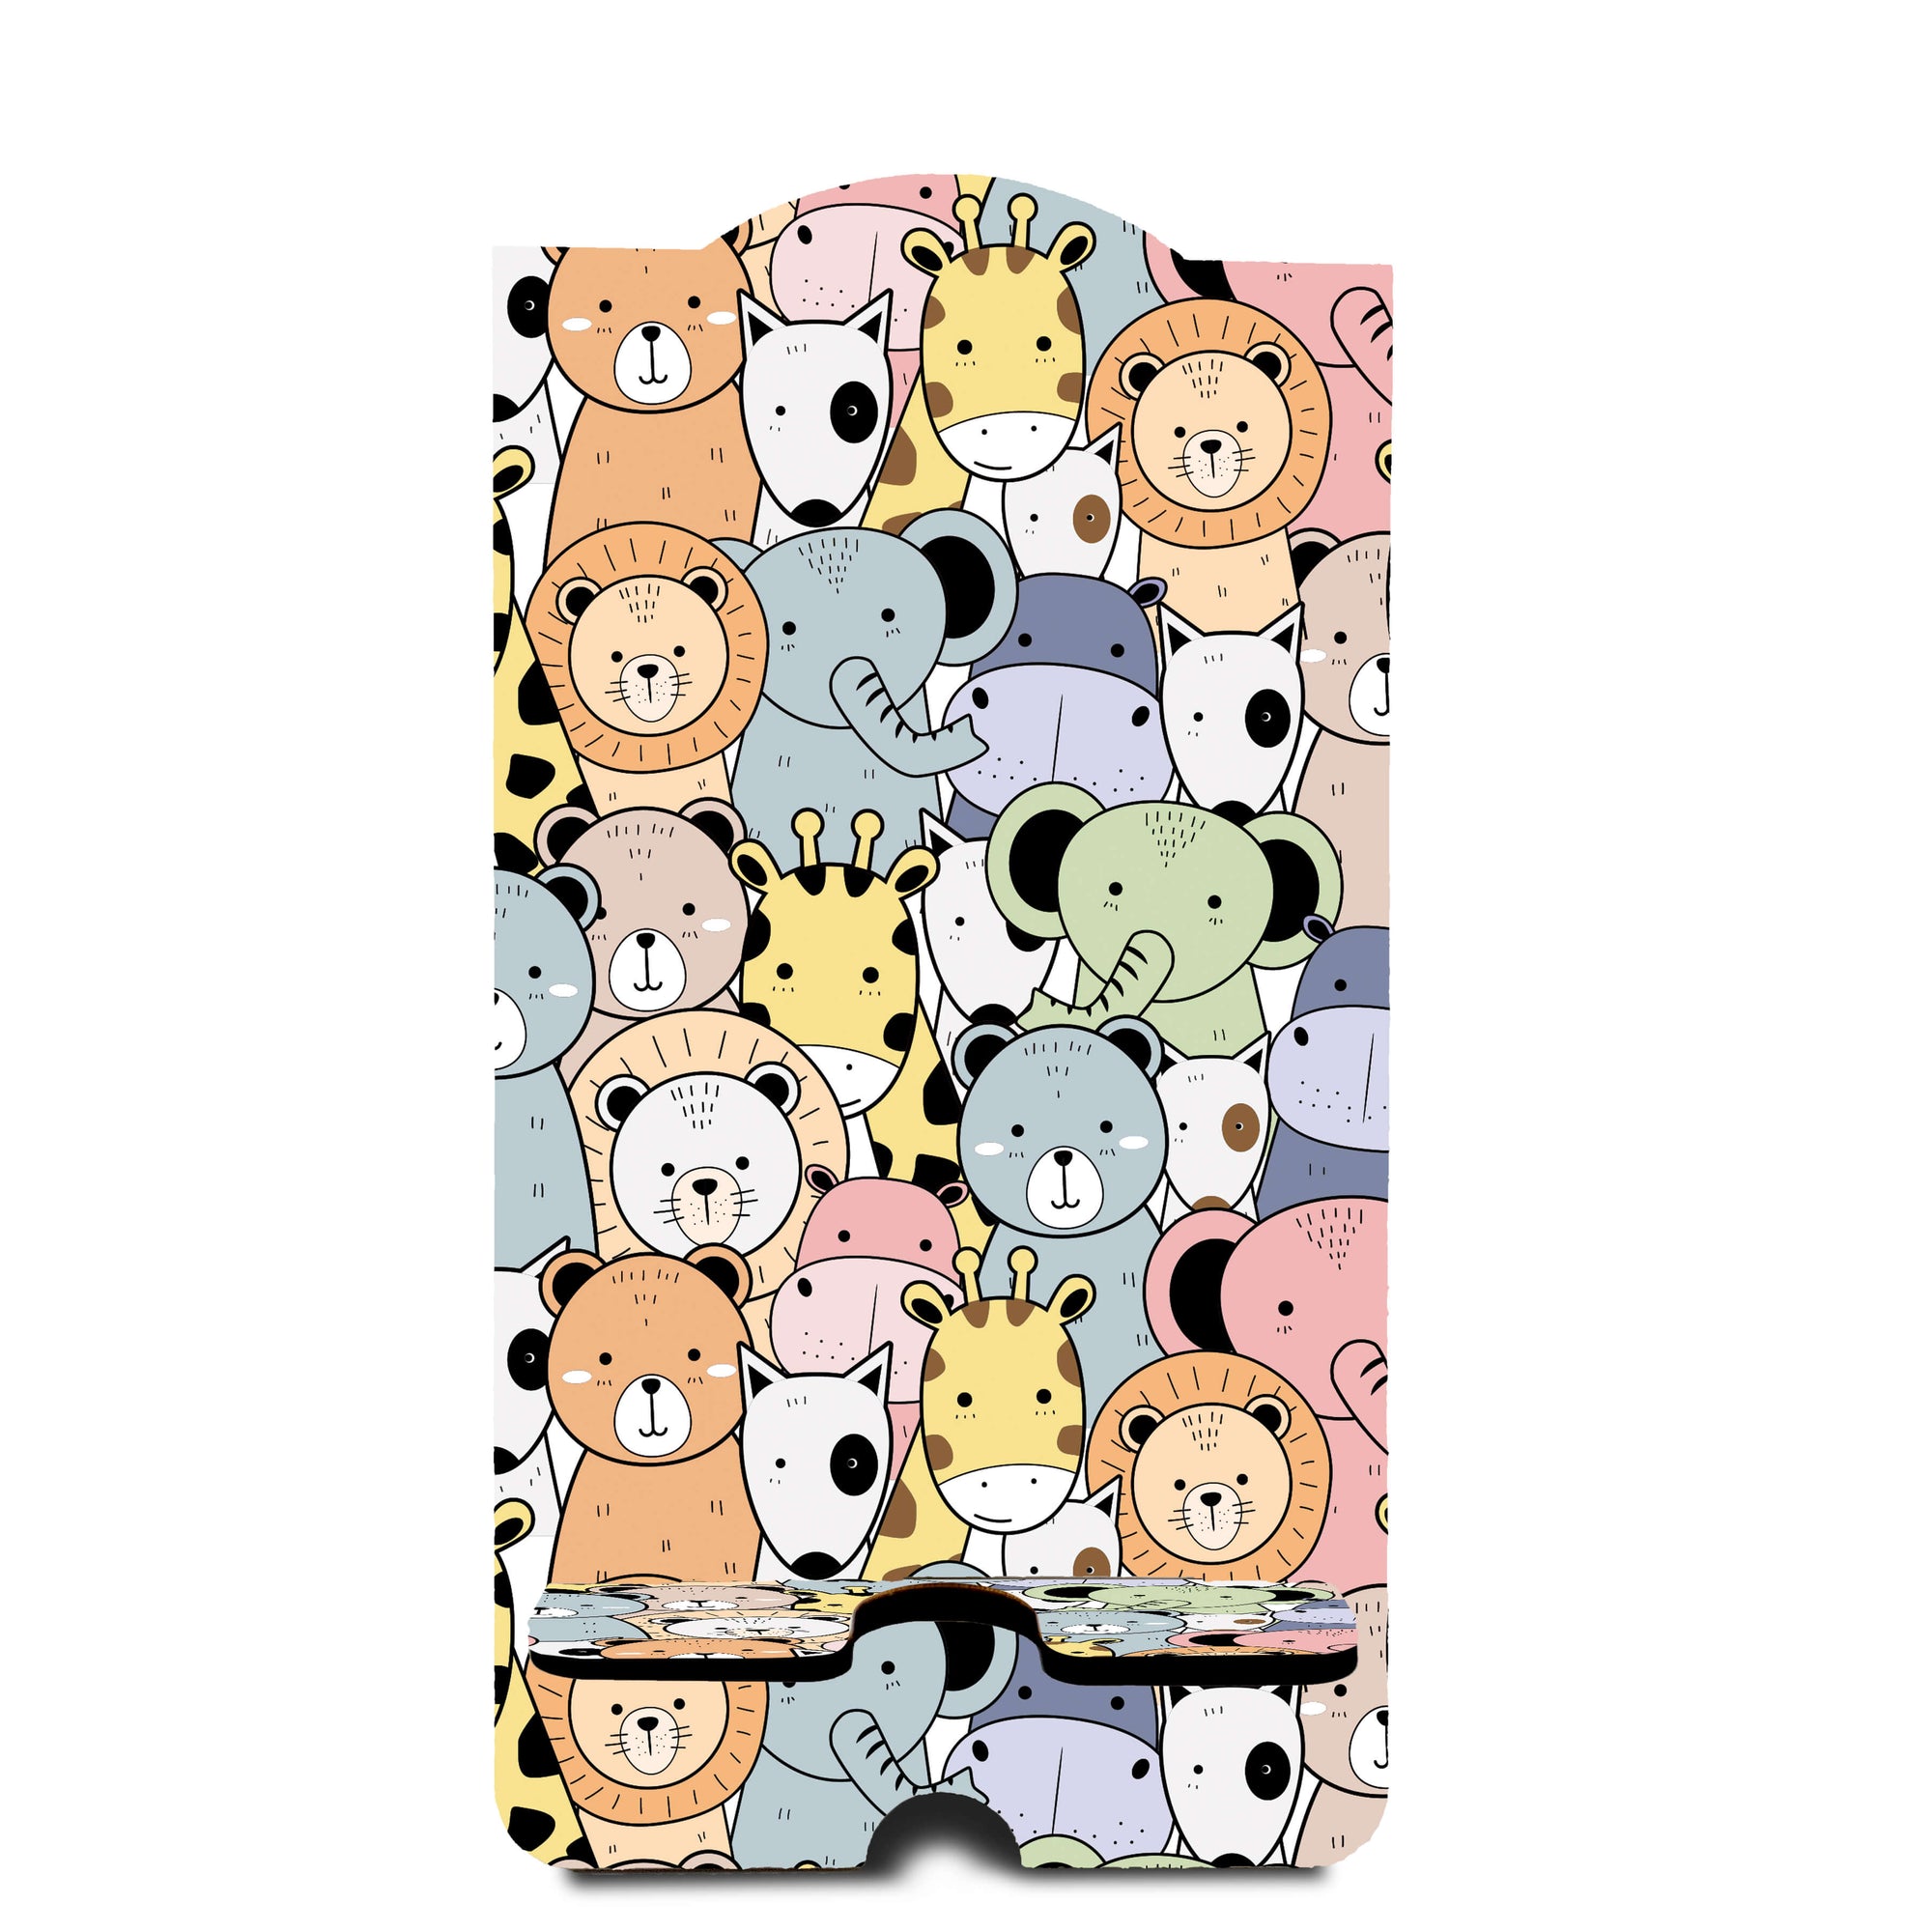 Cute Animal Overload Mobile Stand-Image2-Image6